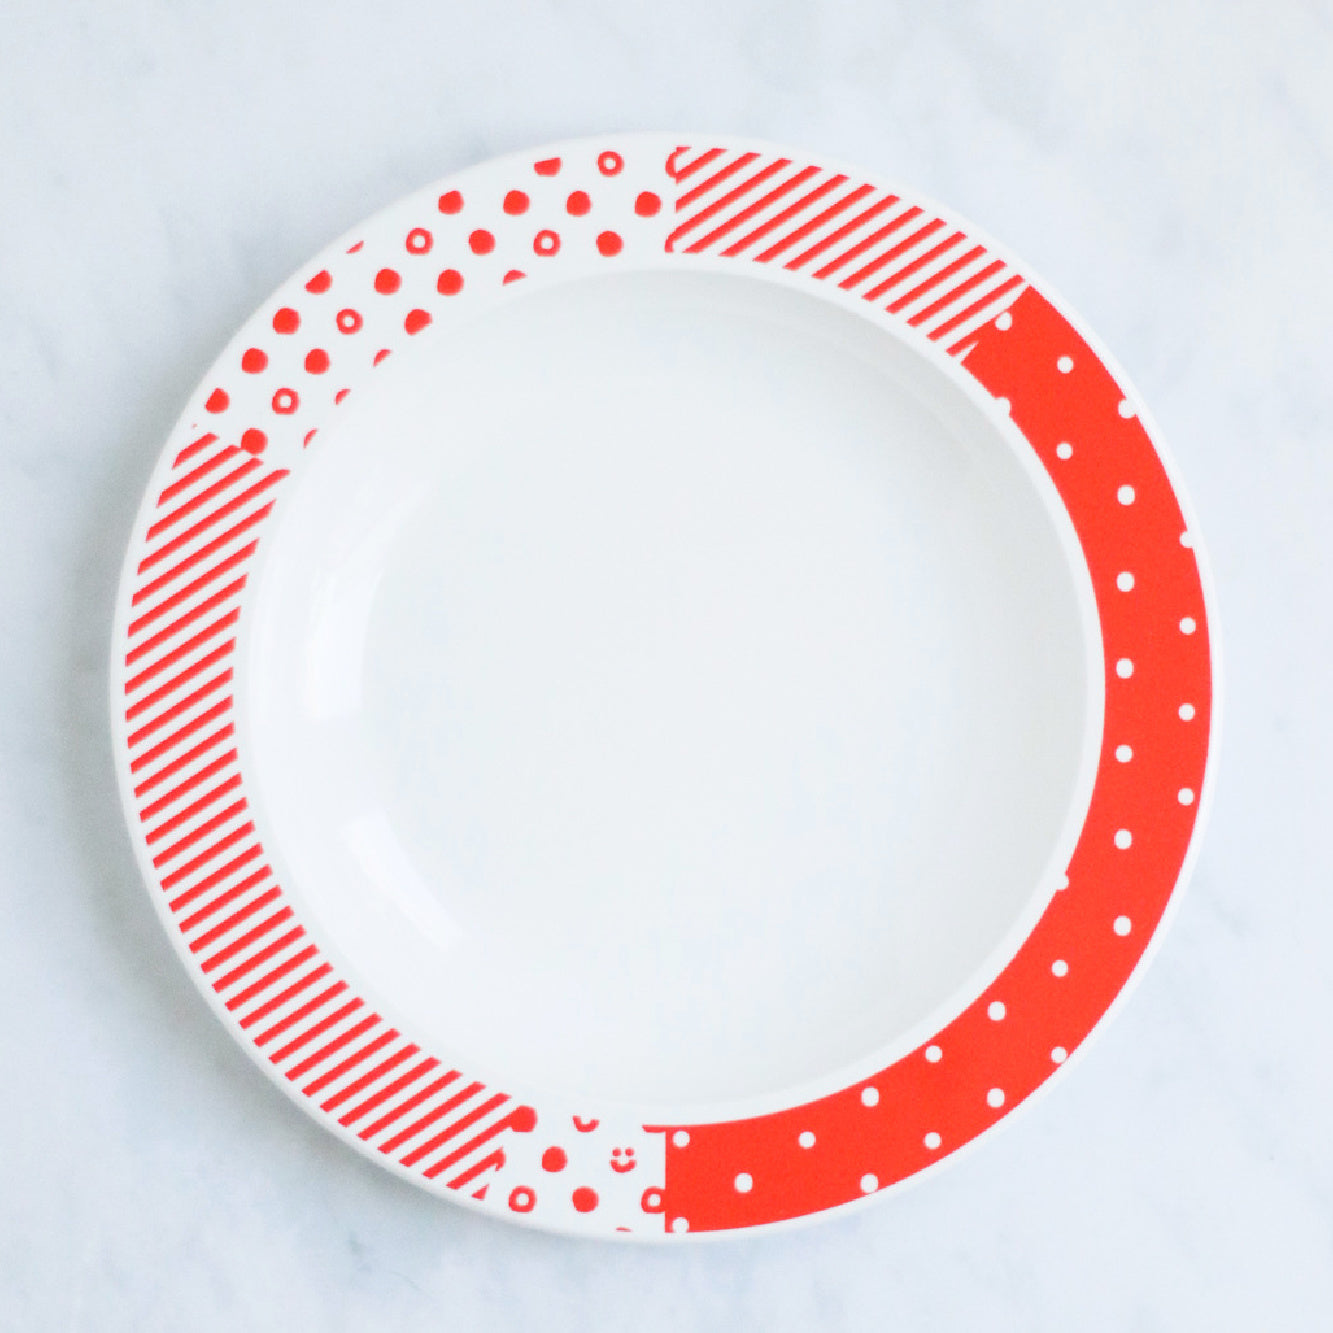 Classic Range Children's plate with red and white pattern